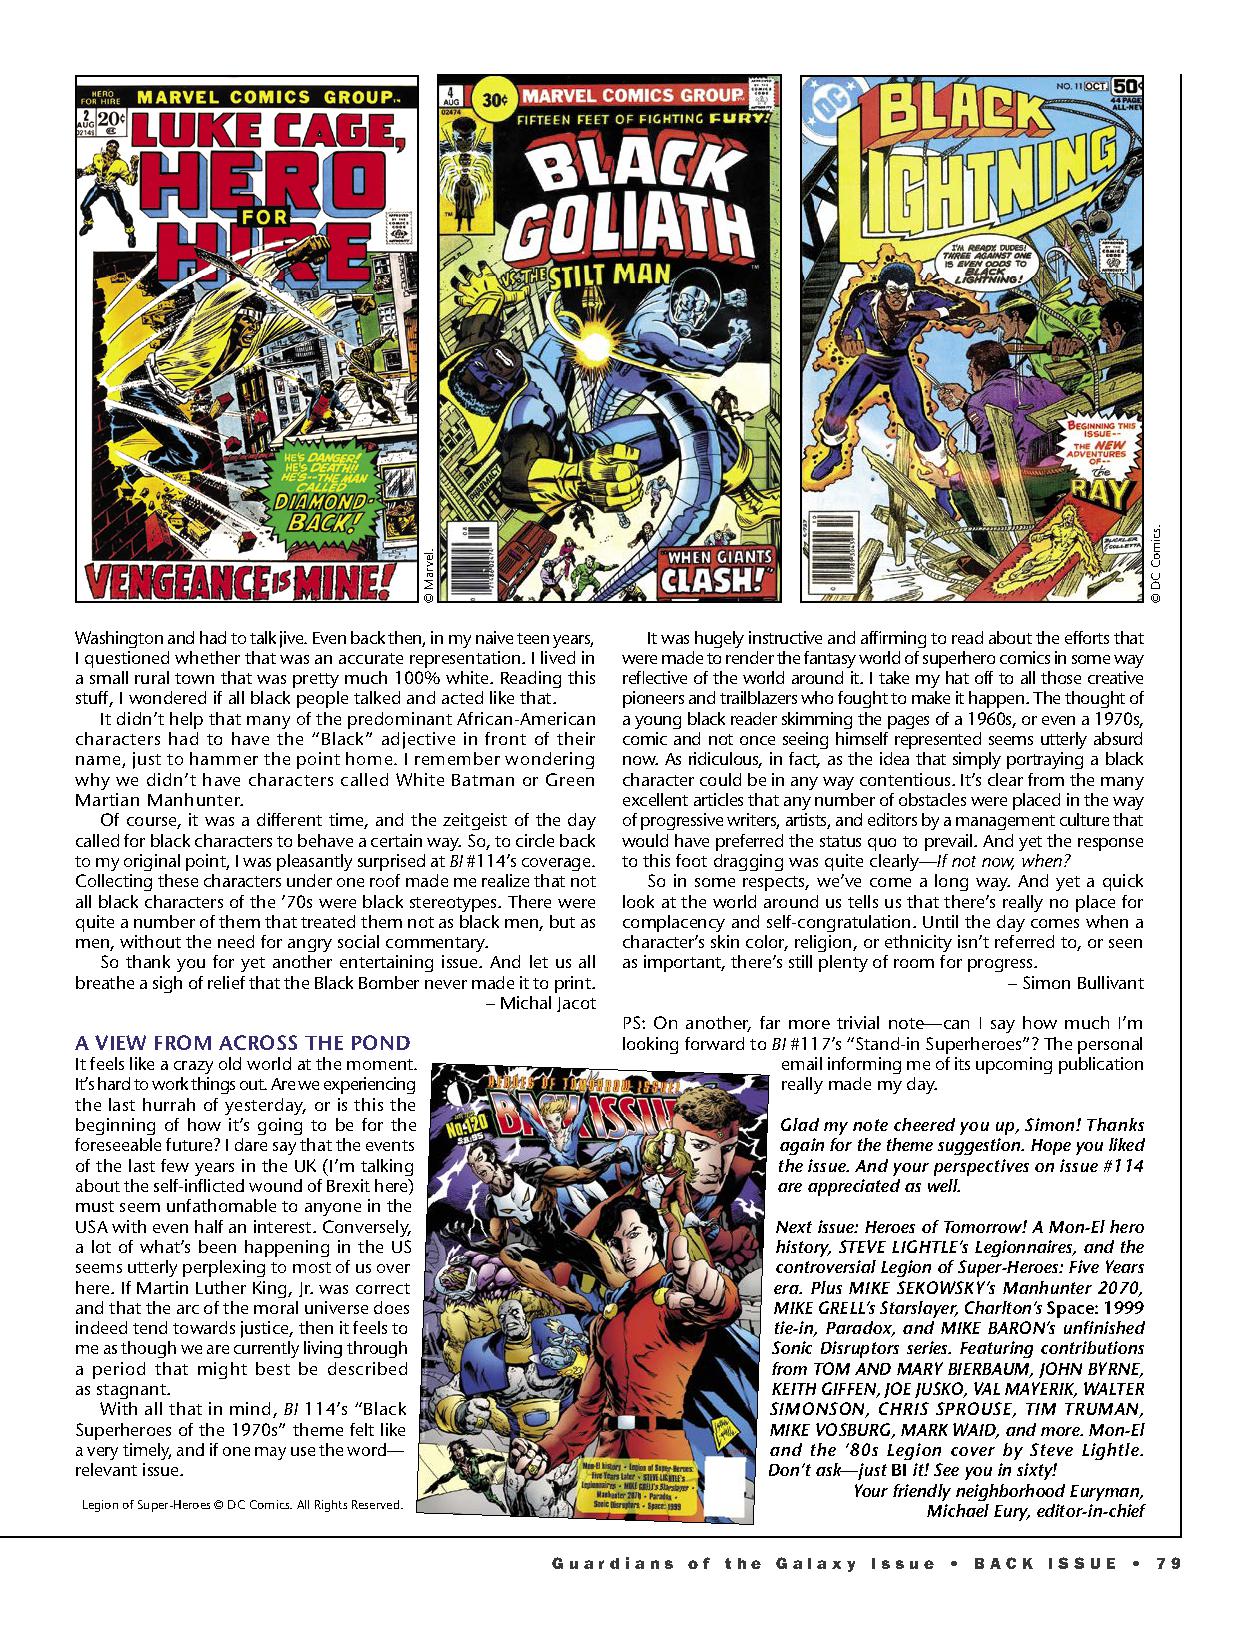 Read online Back Issue comic -  Issue #119 - 81